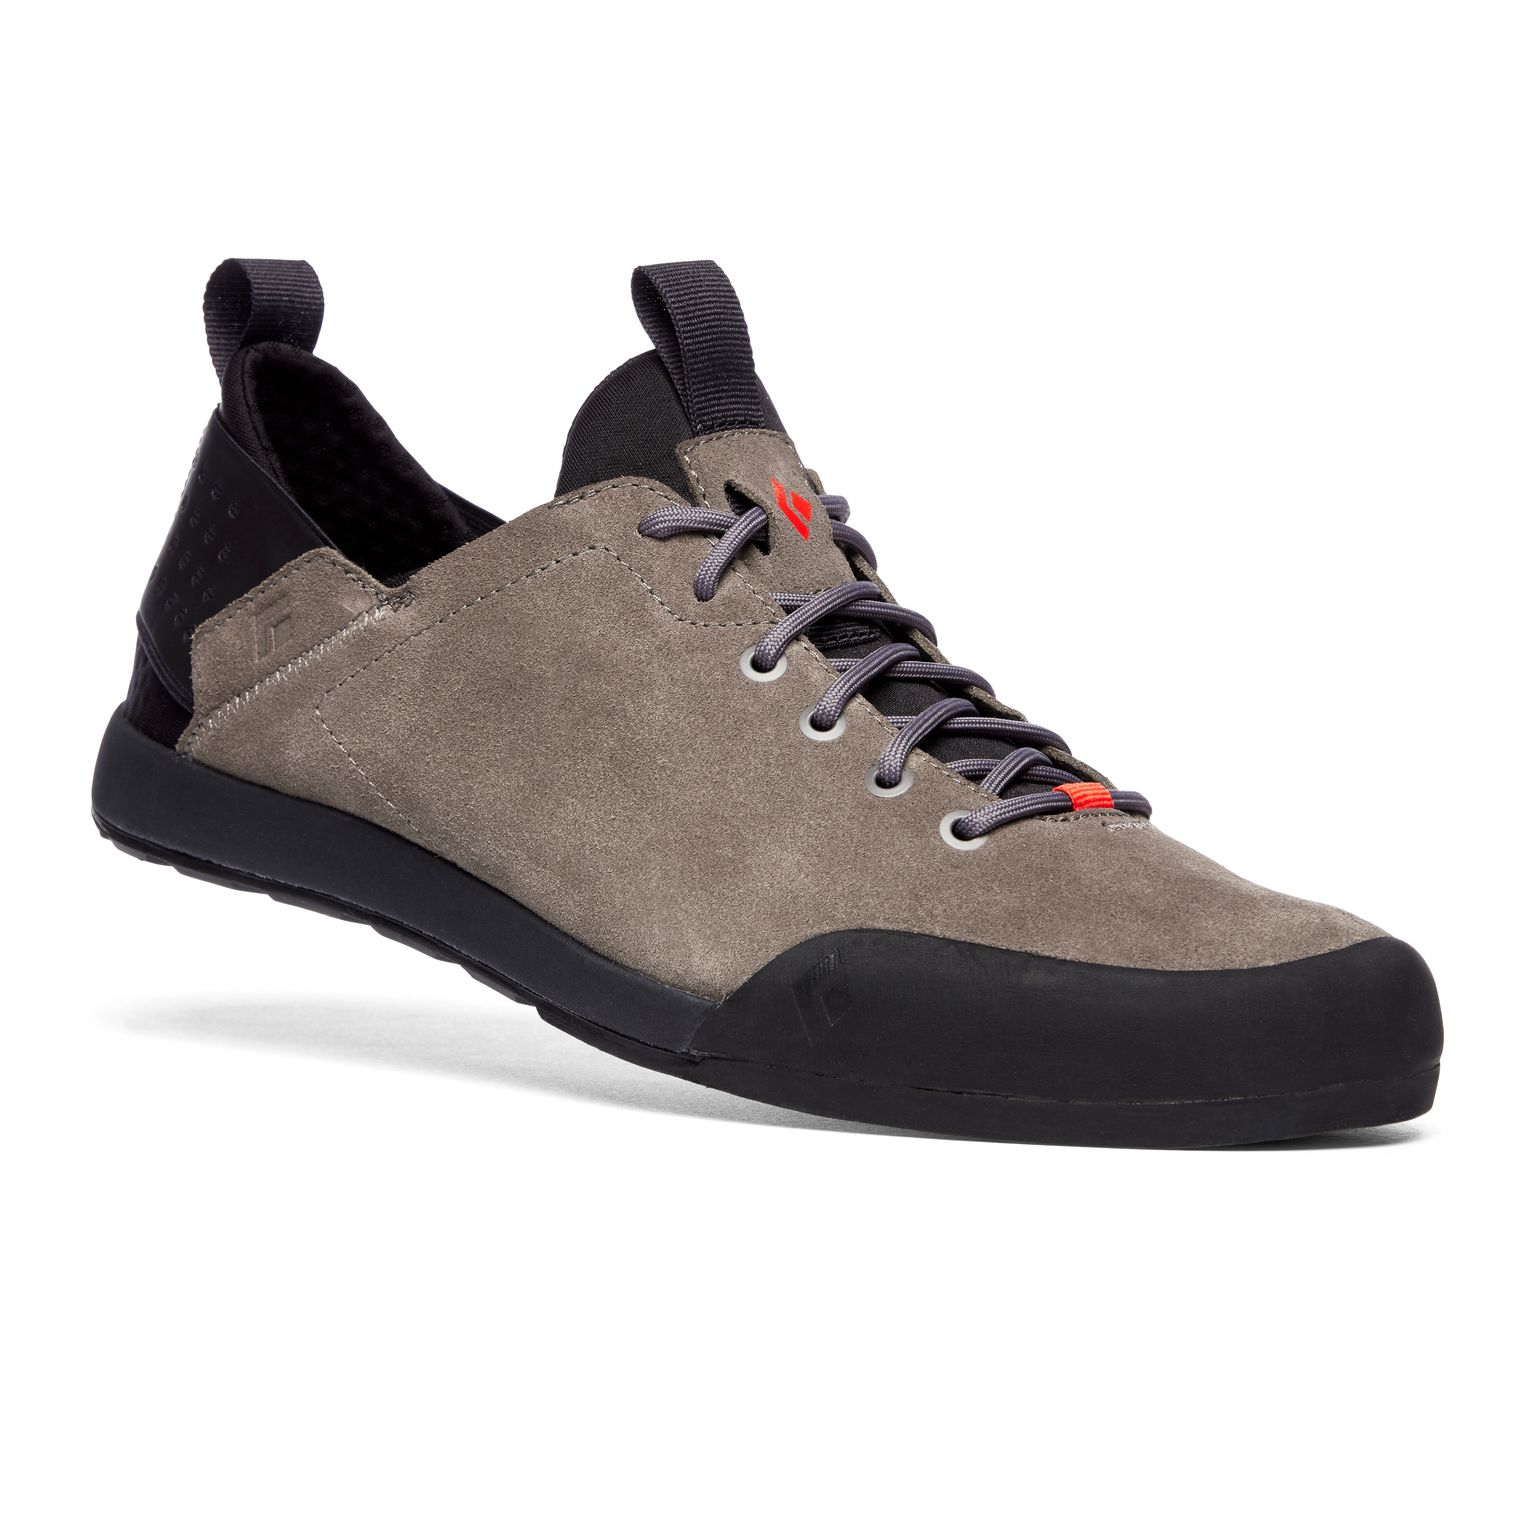 Men's Session Suede Approach Shoes Walnut